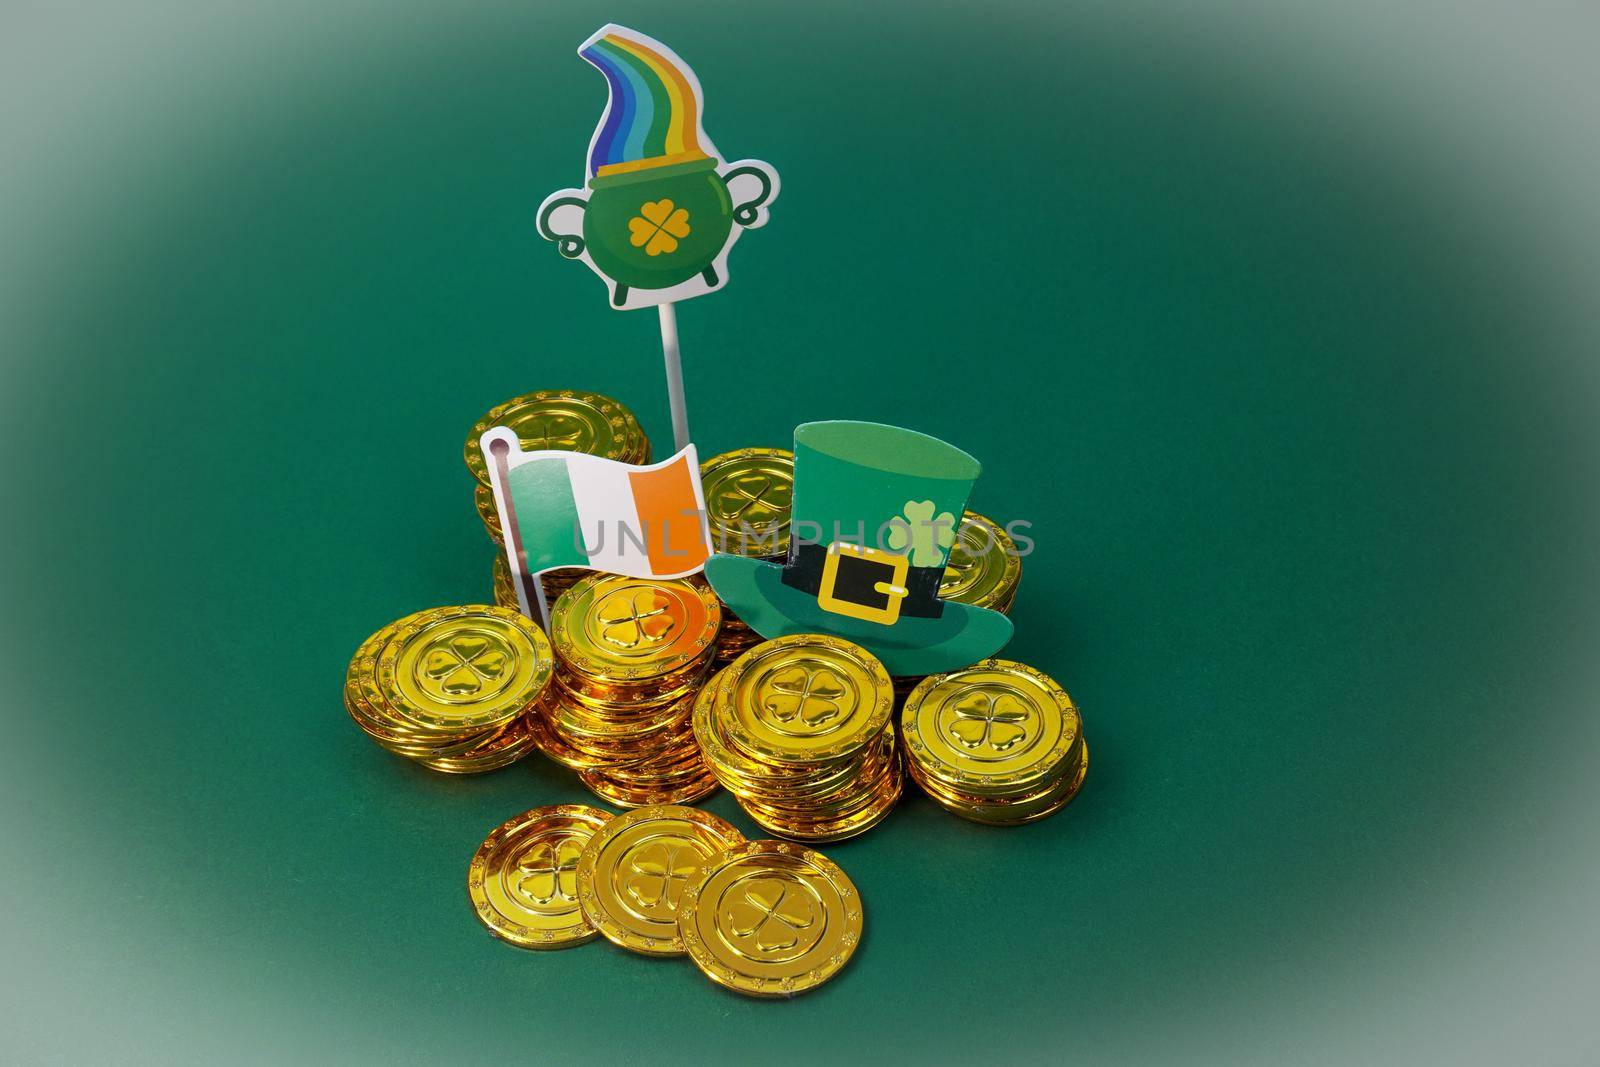 Items that are dedicated to St. Patrick's Day are laid out on the background by Spirina